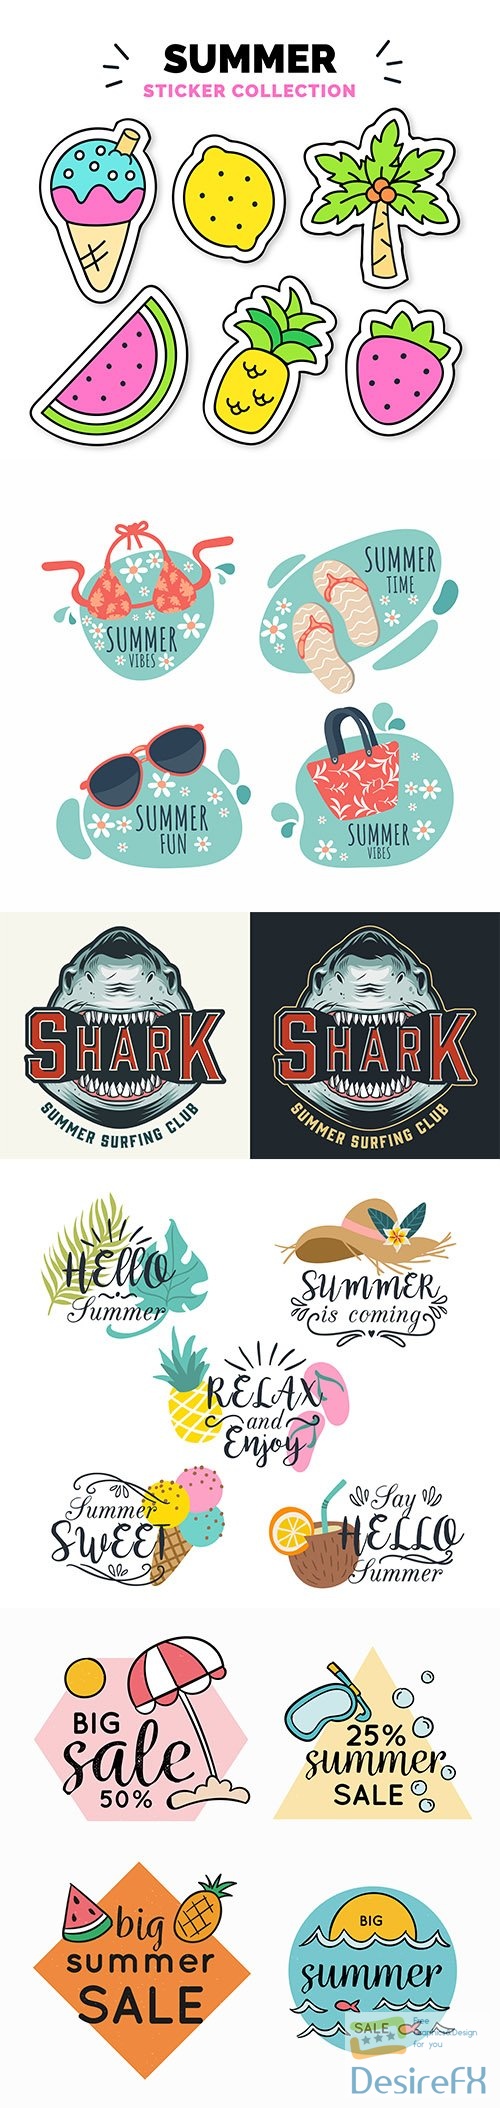 Colorful hand-drawn summer badge collection and surfing club logo